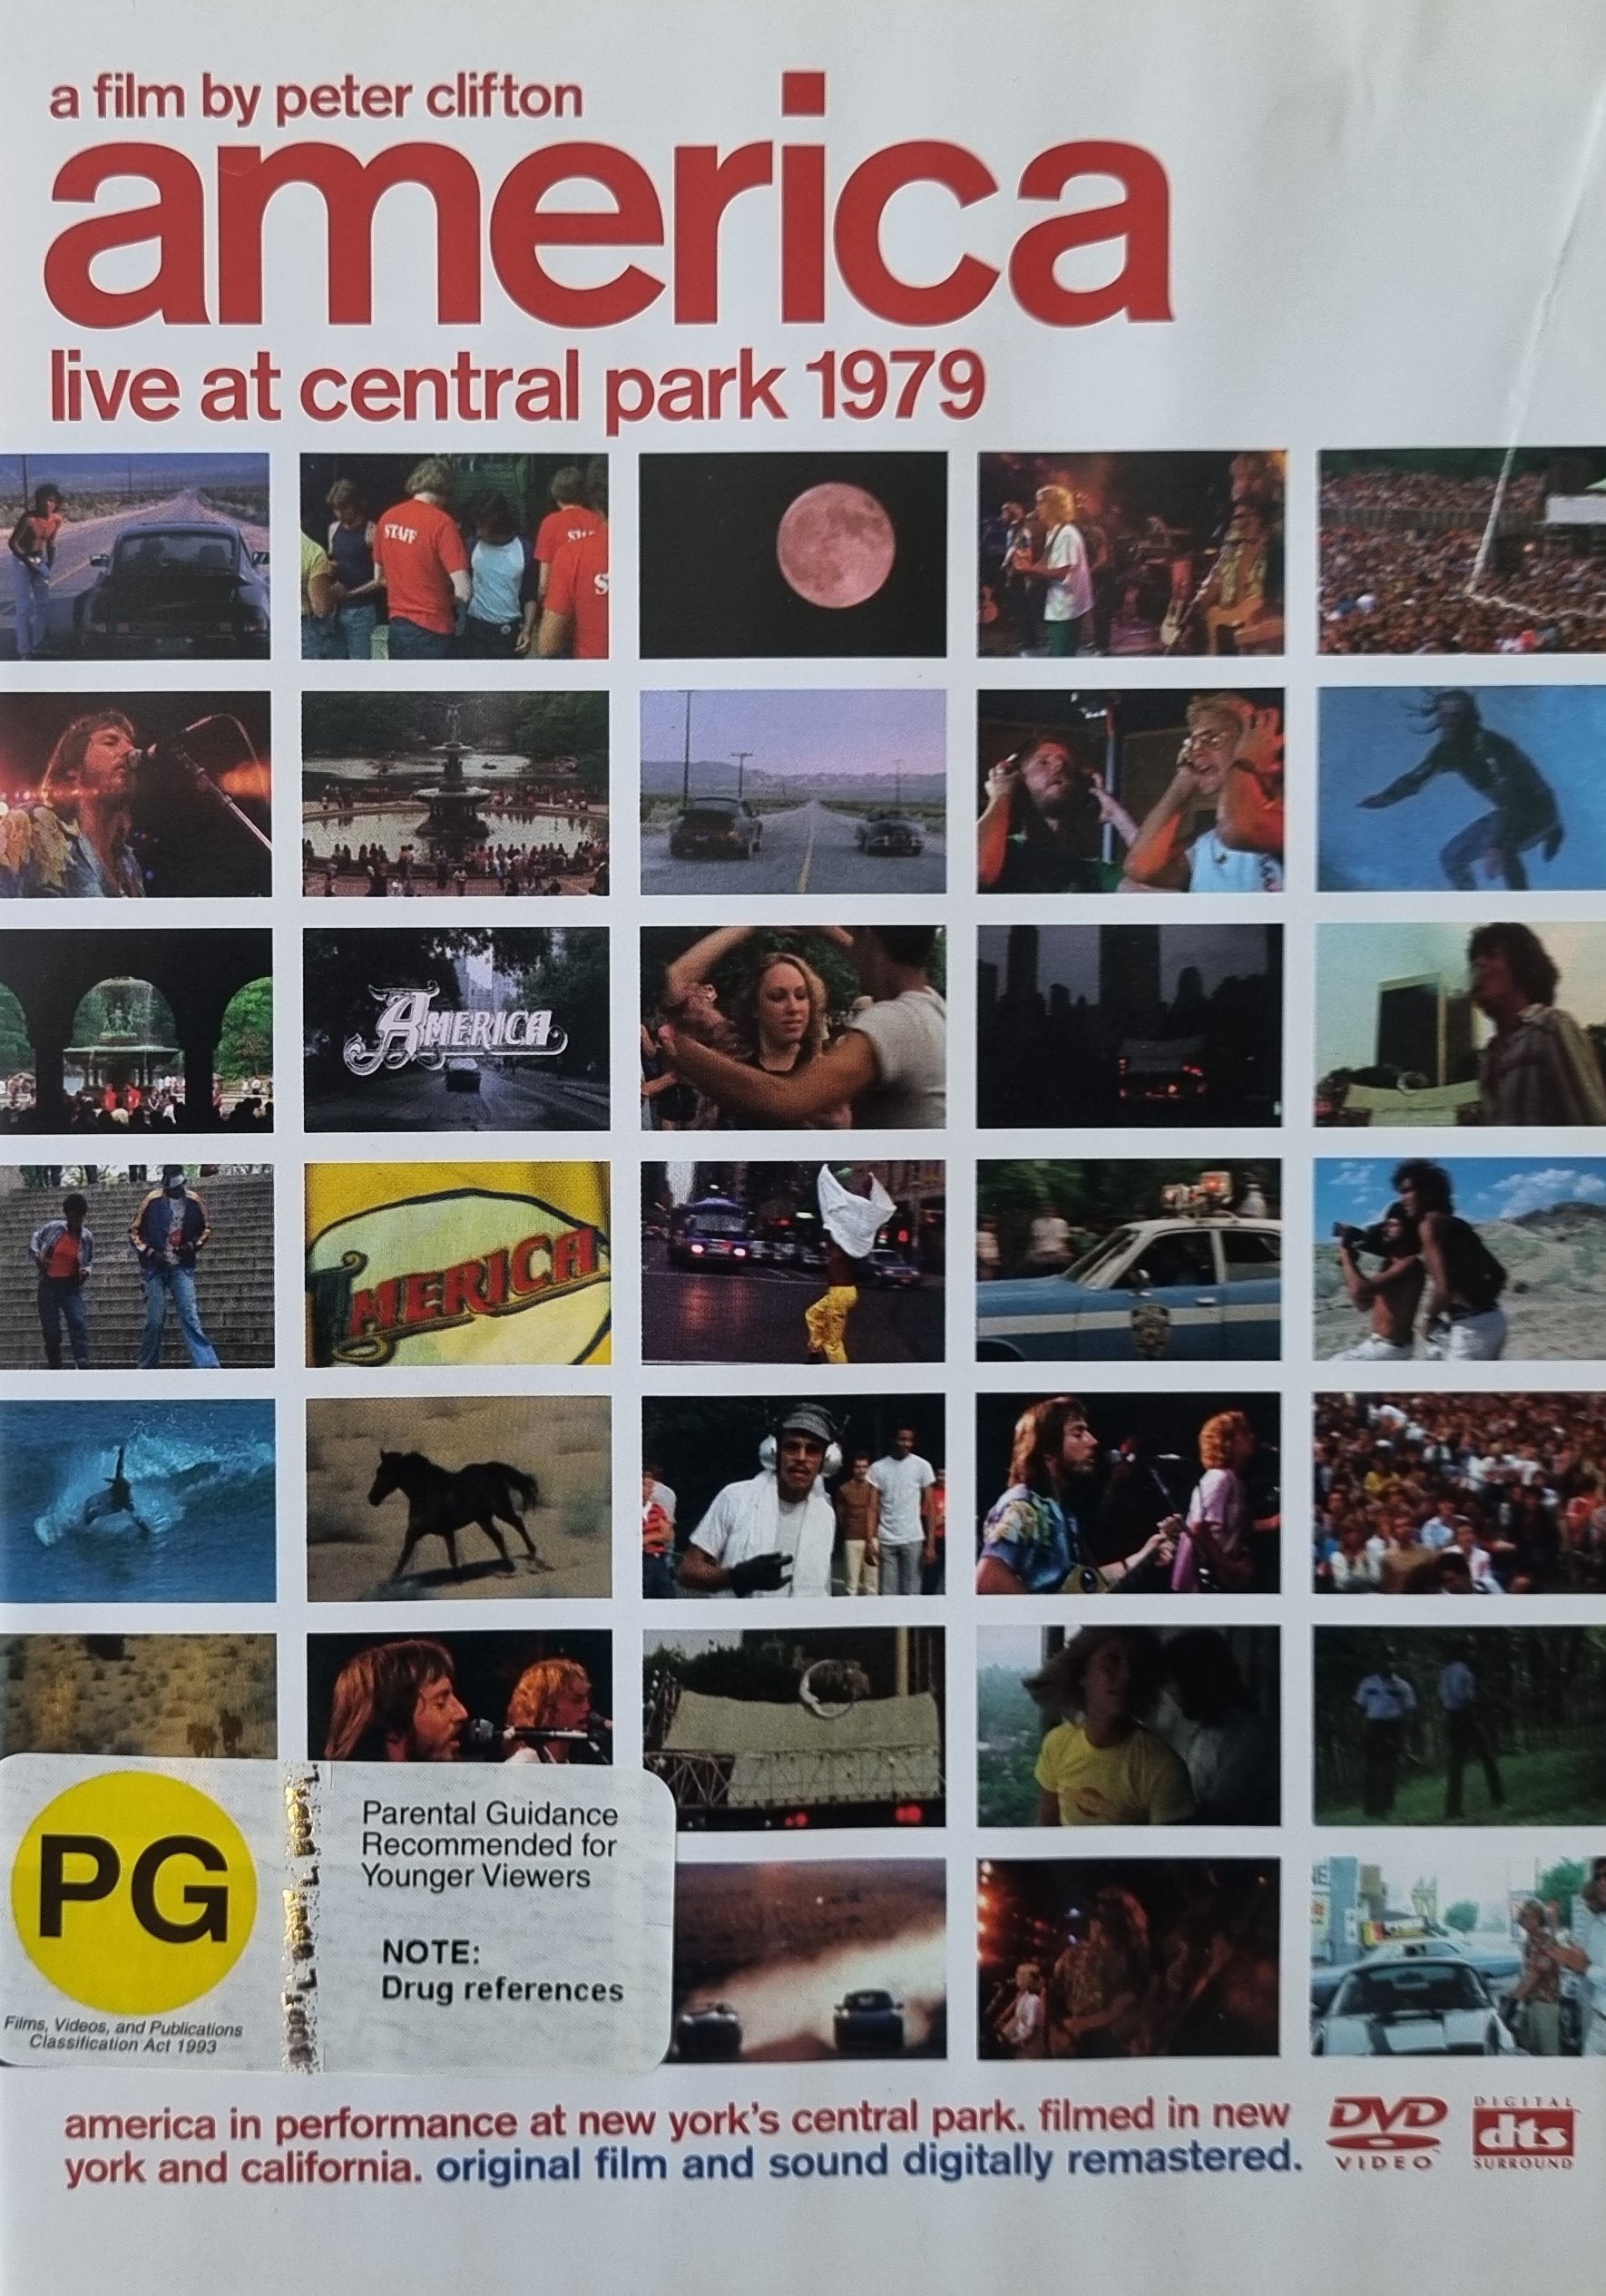 America: Live at Central Park 1979